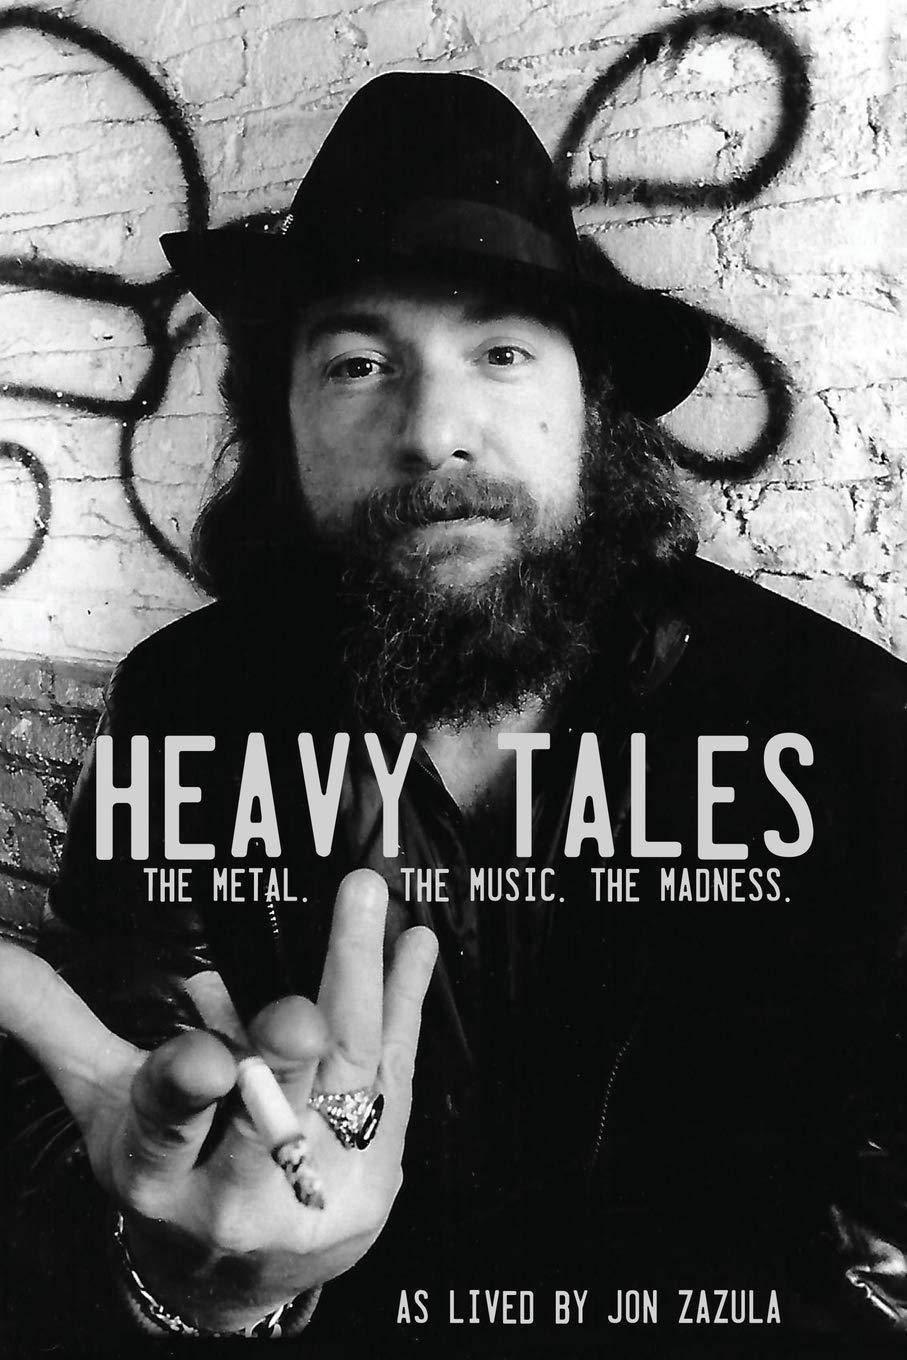 Heavy Tales: The Metal. The Music. The Madness. - SureShot Books Publishing LLC